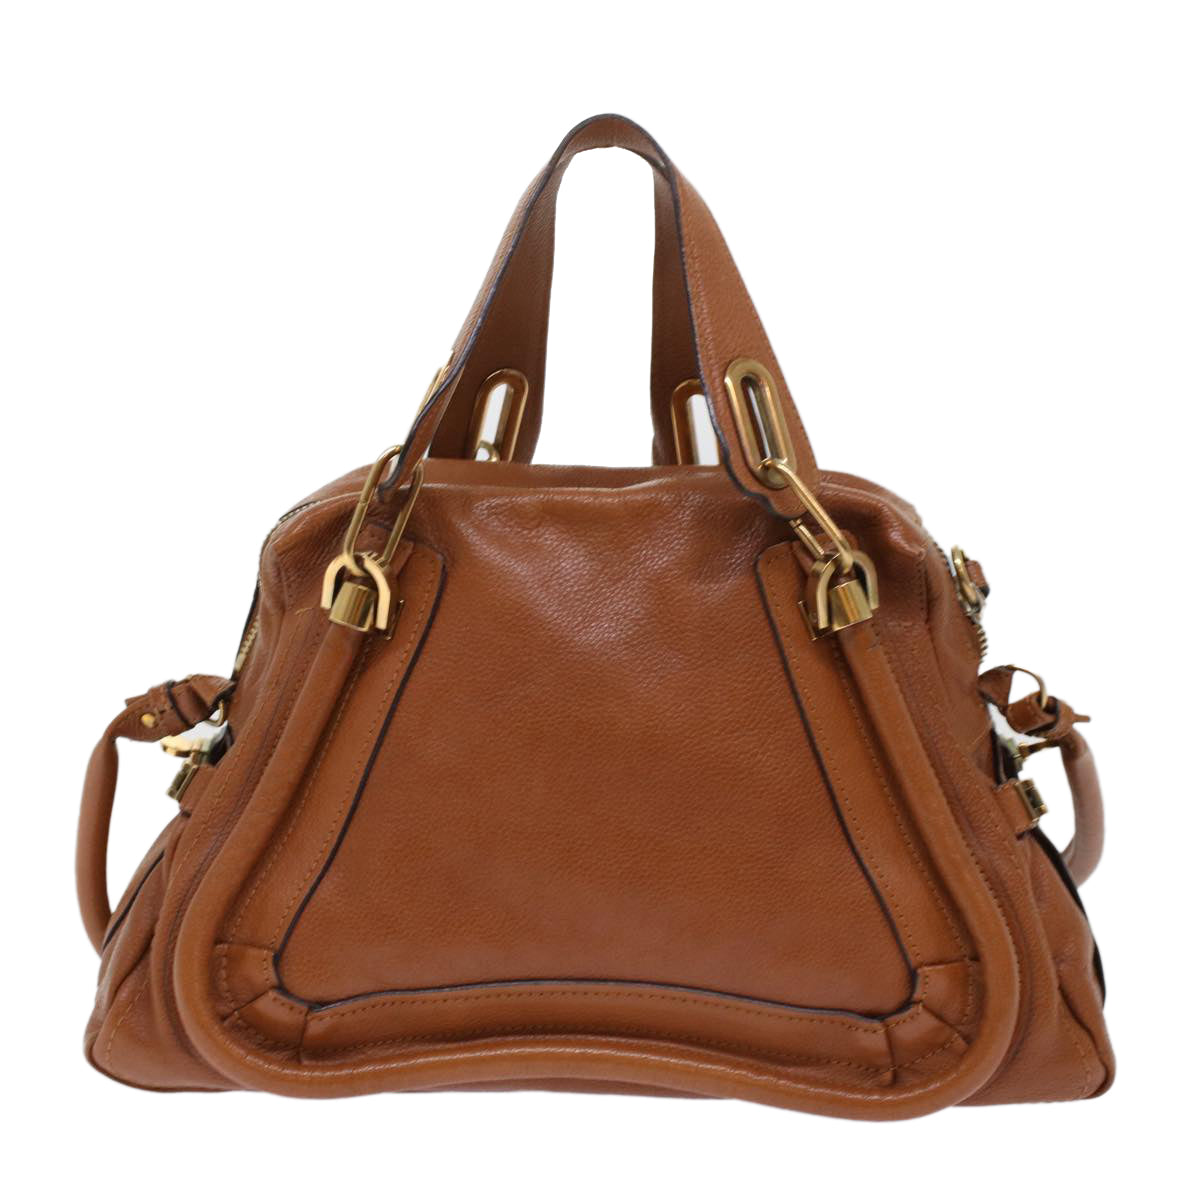 Chloe Paraty Shoulder Bag Leather 2way Brown Auth am4763 - 0